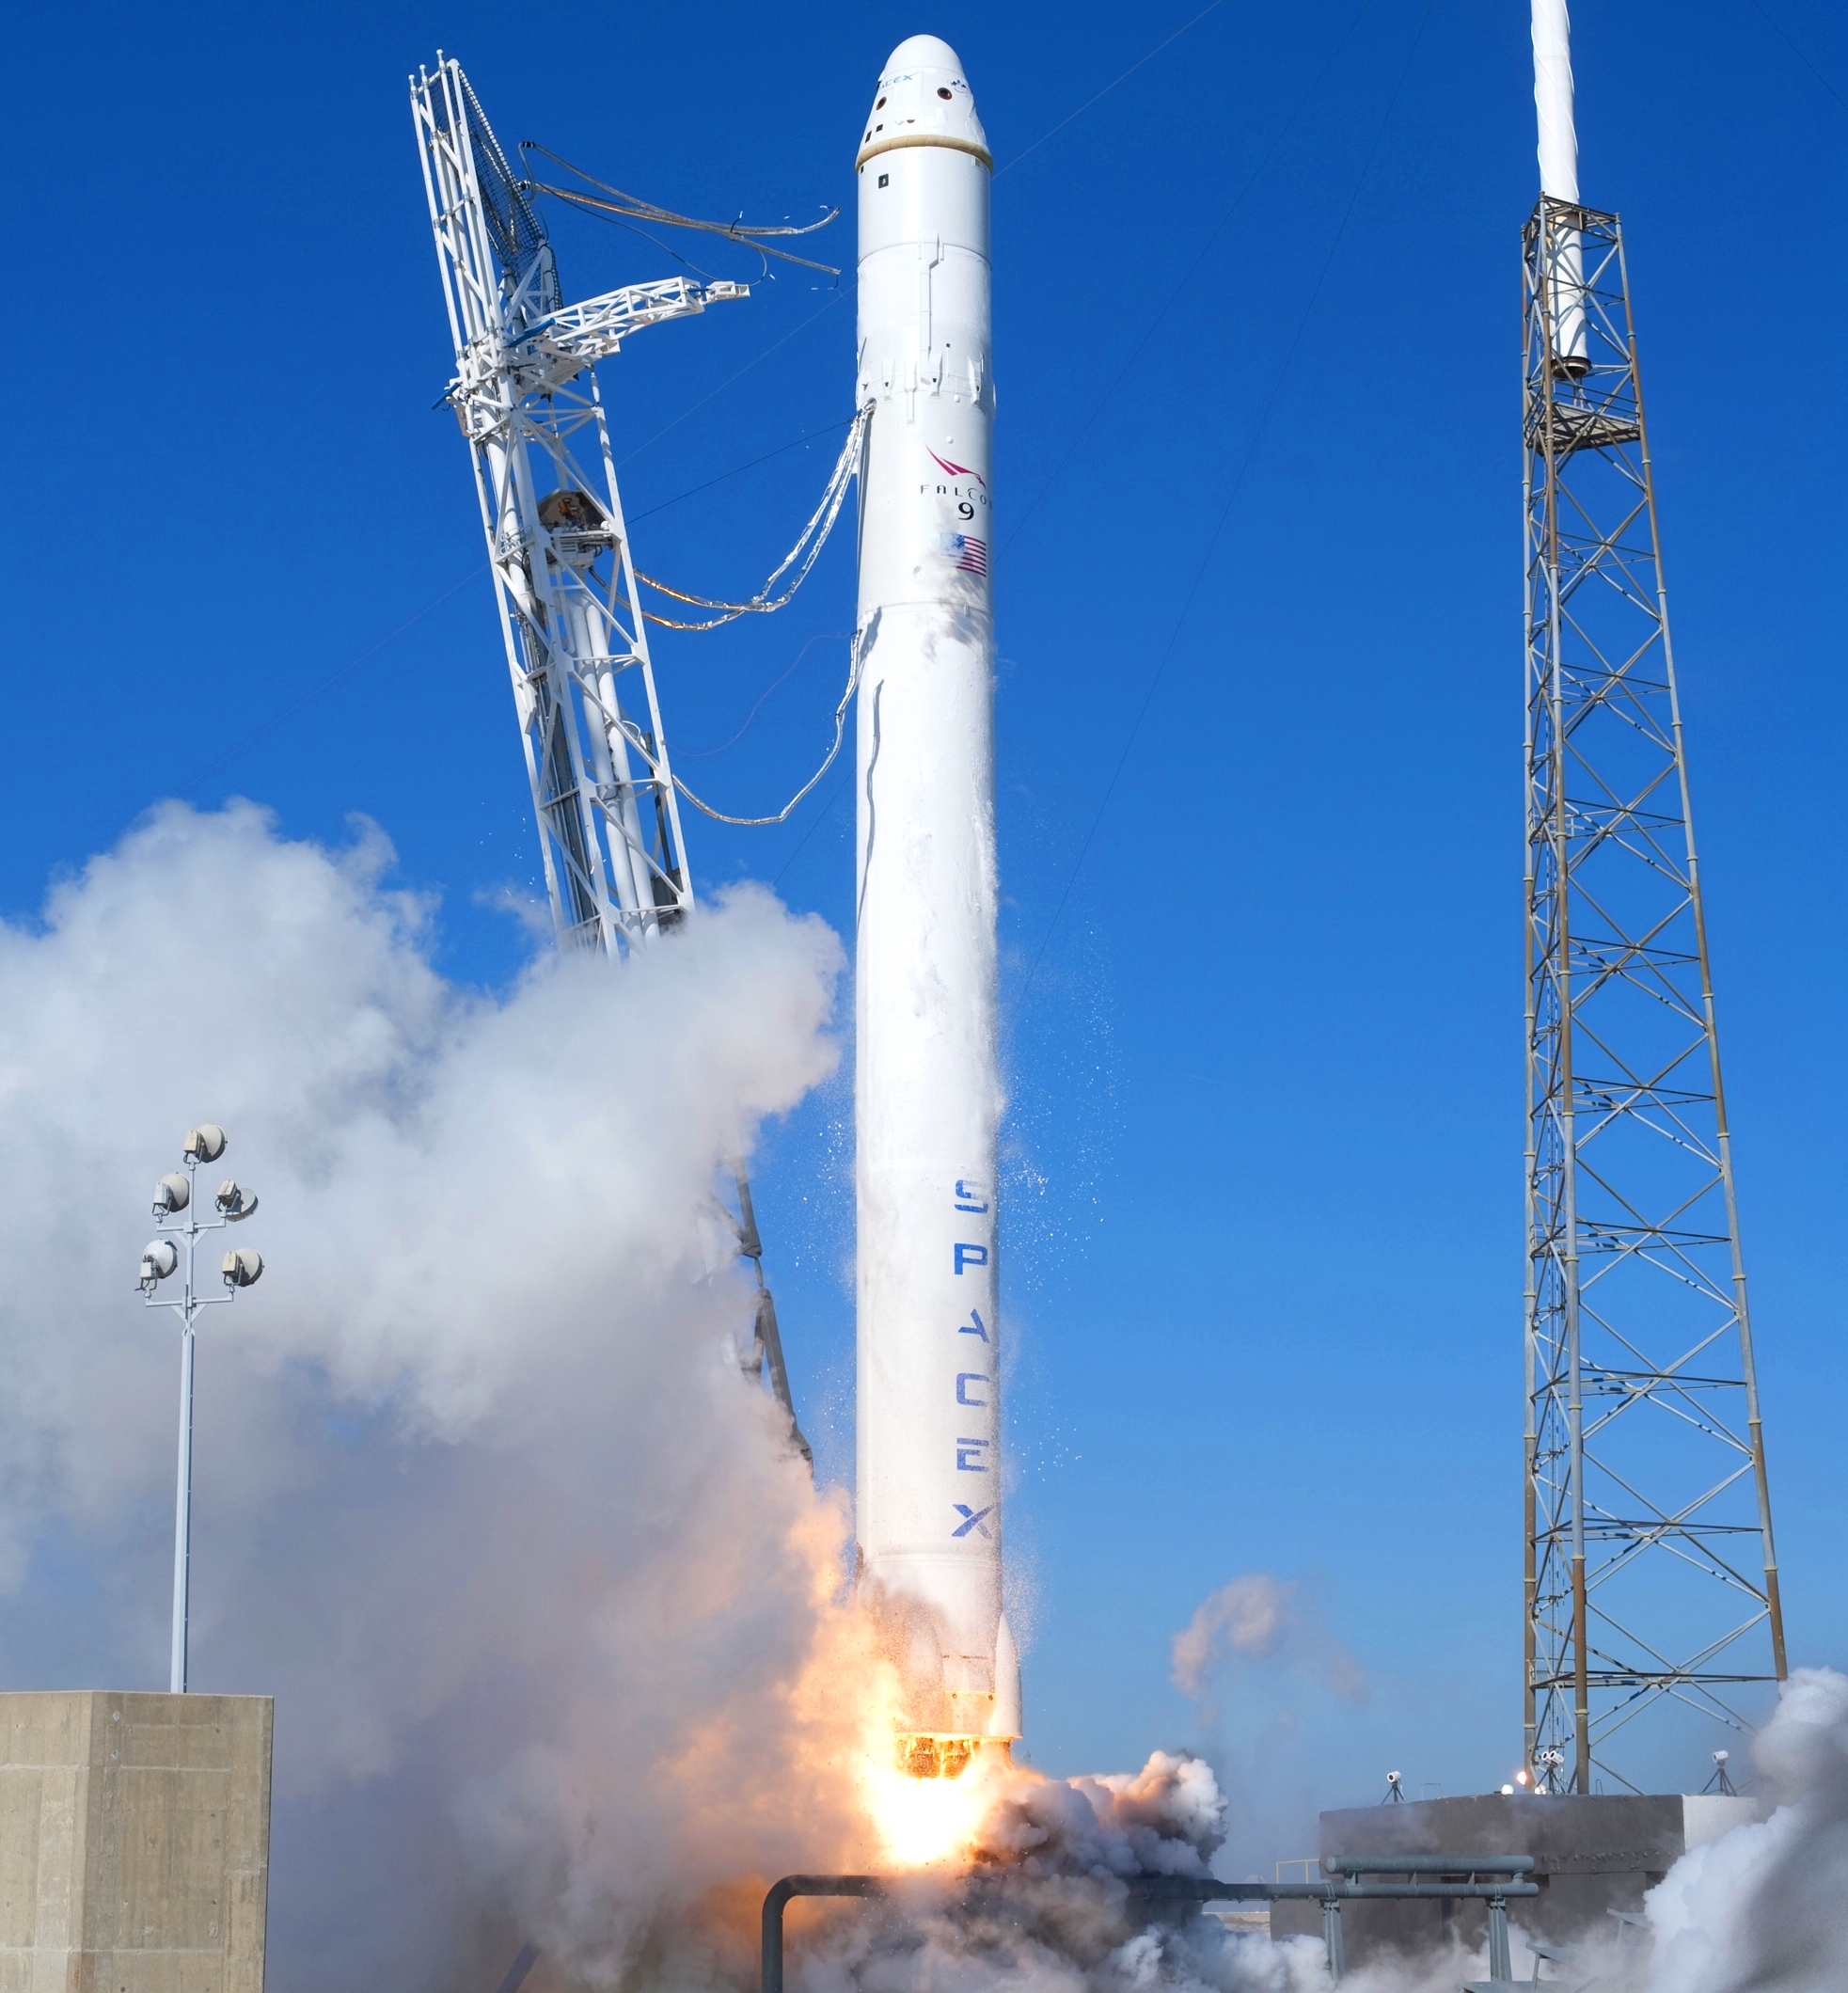 SpaceX’s Falcon 9 rocket and Dragon spacecraft lift off from Launch Complex-40 at Cape Canaveral Air Force Station, Falcon 9 launches with first Dragon spacecraft (Photo: NASA ~ National Aeronautics & Space Administration)